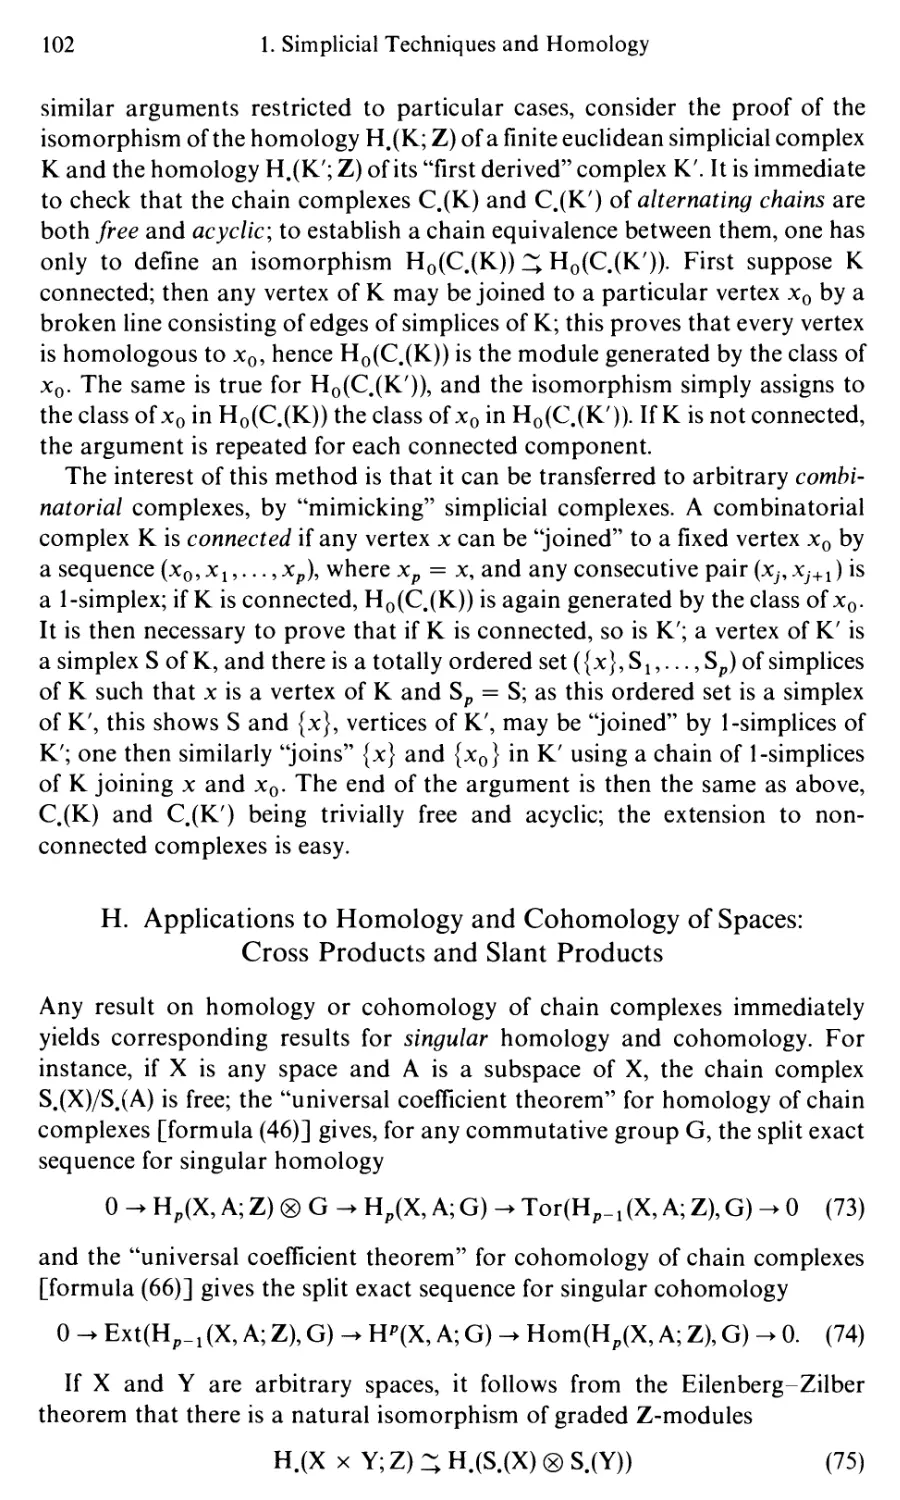 H. Applications to Homology and Cohomology of Spaces: Cross Products and Slant Products